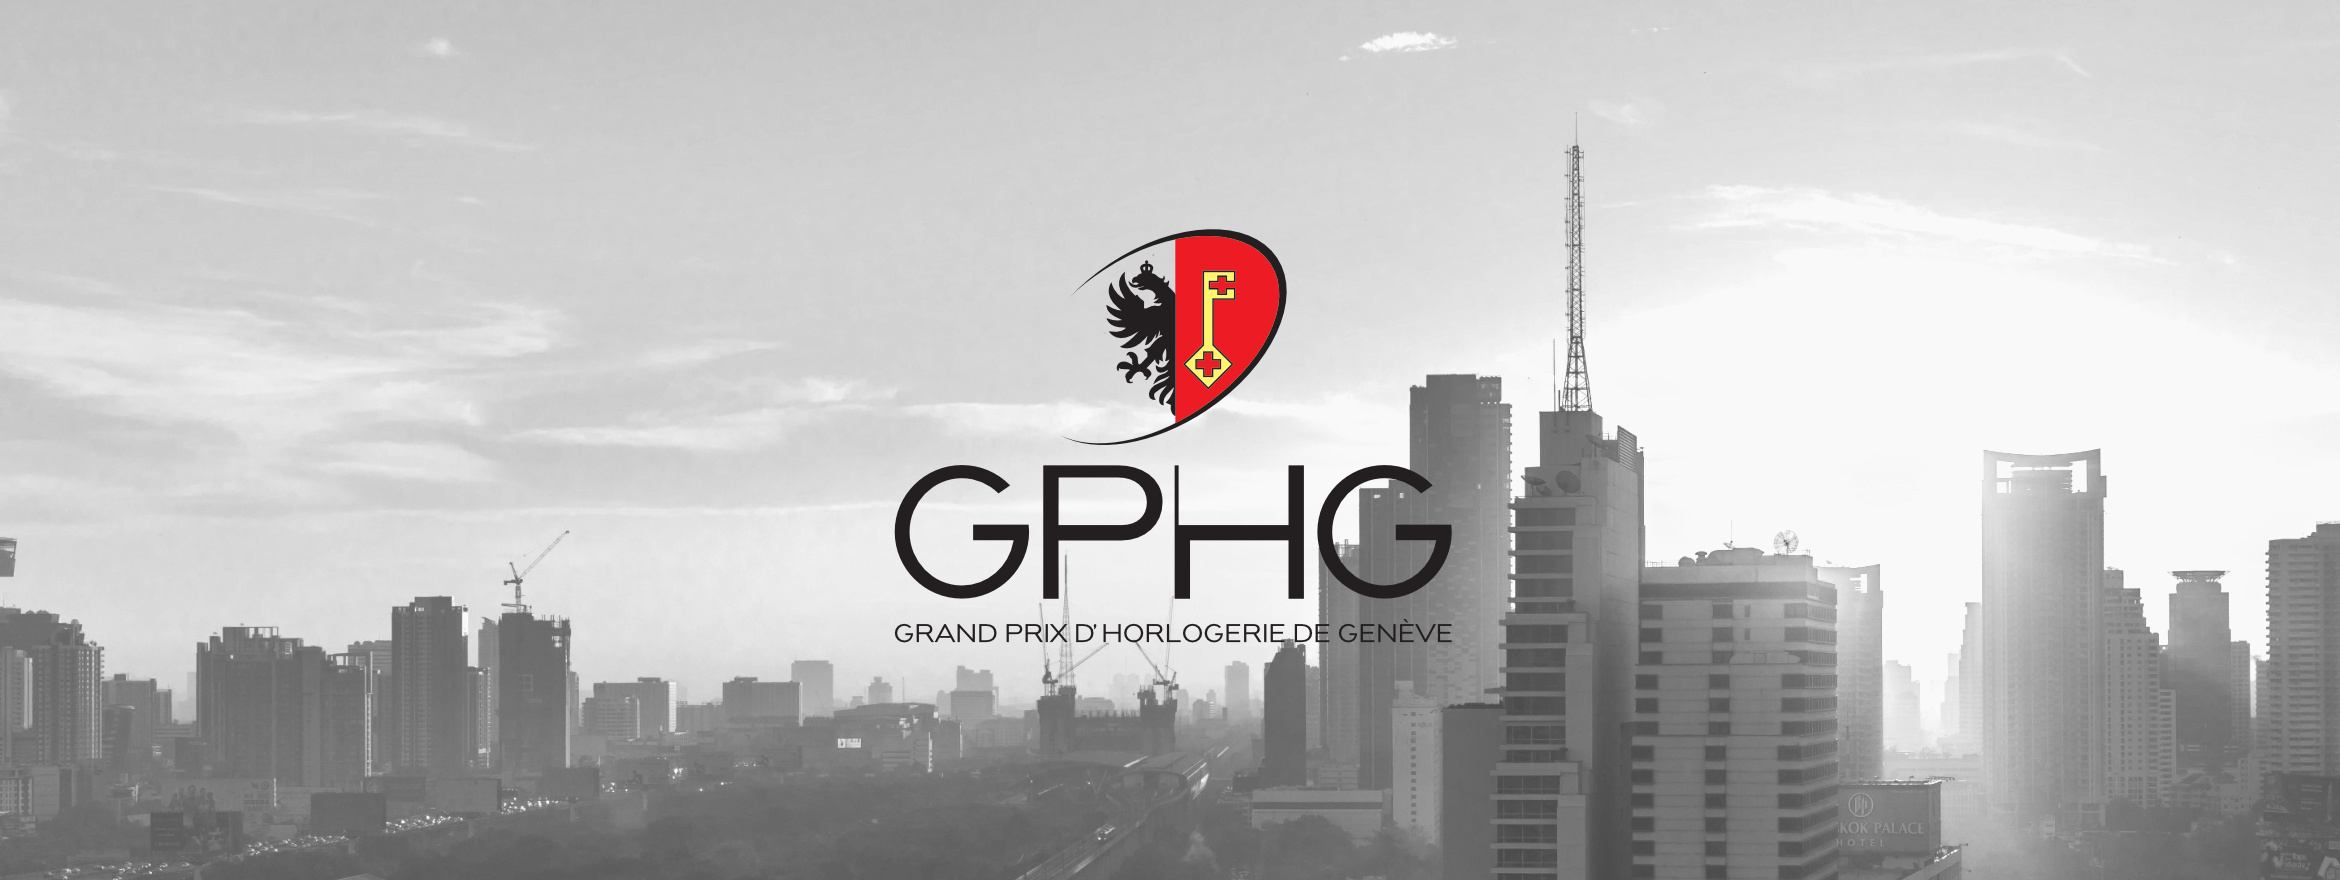 GPHG in Bangkok for the First Time